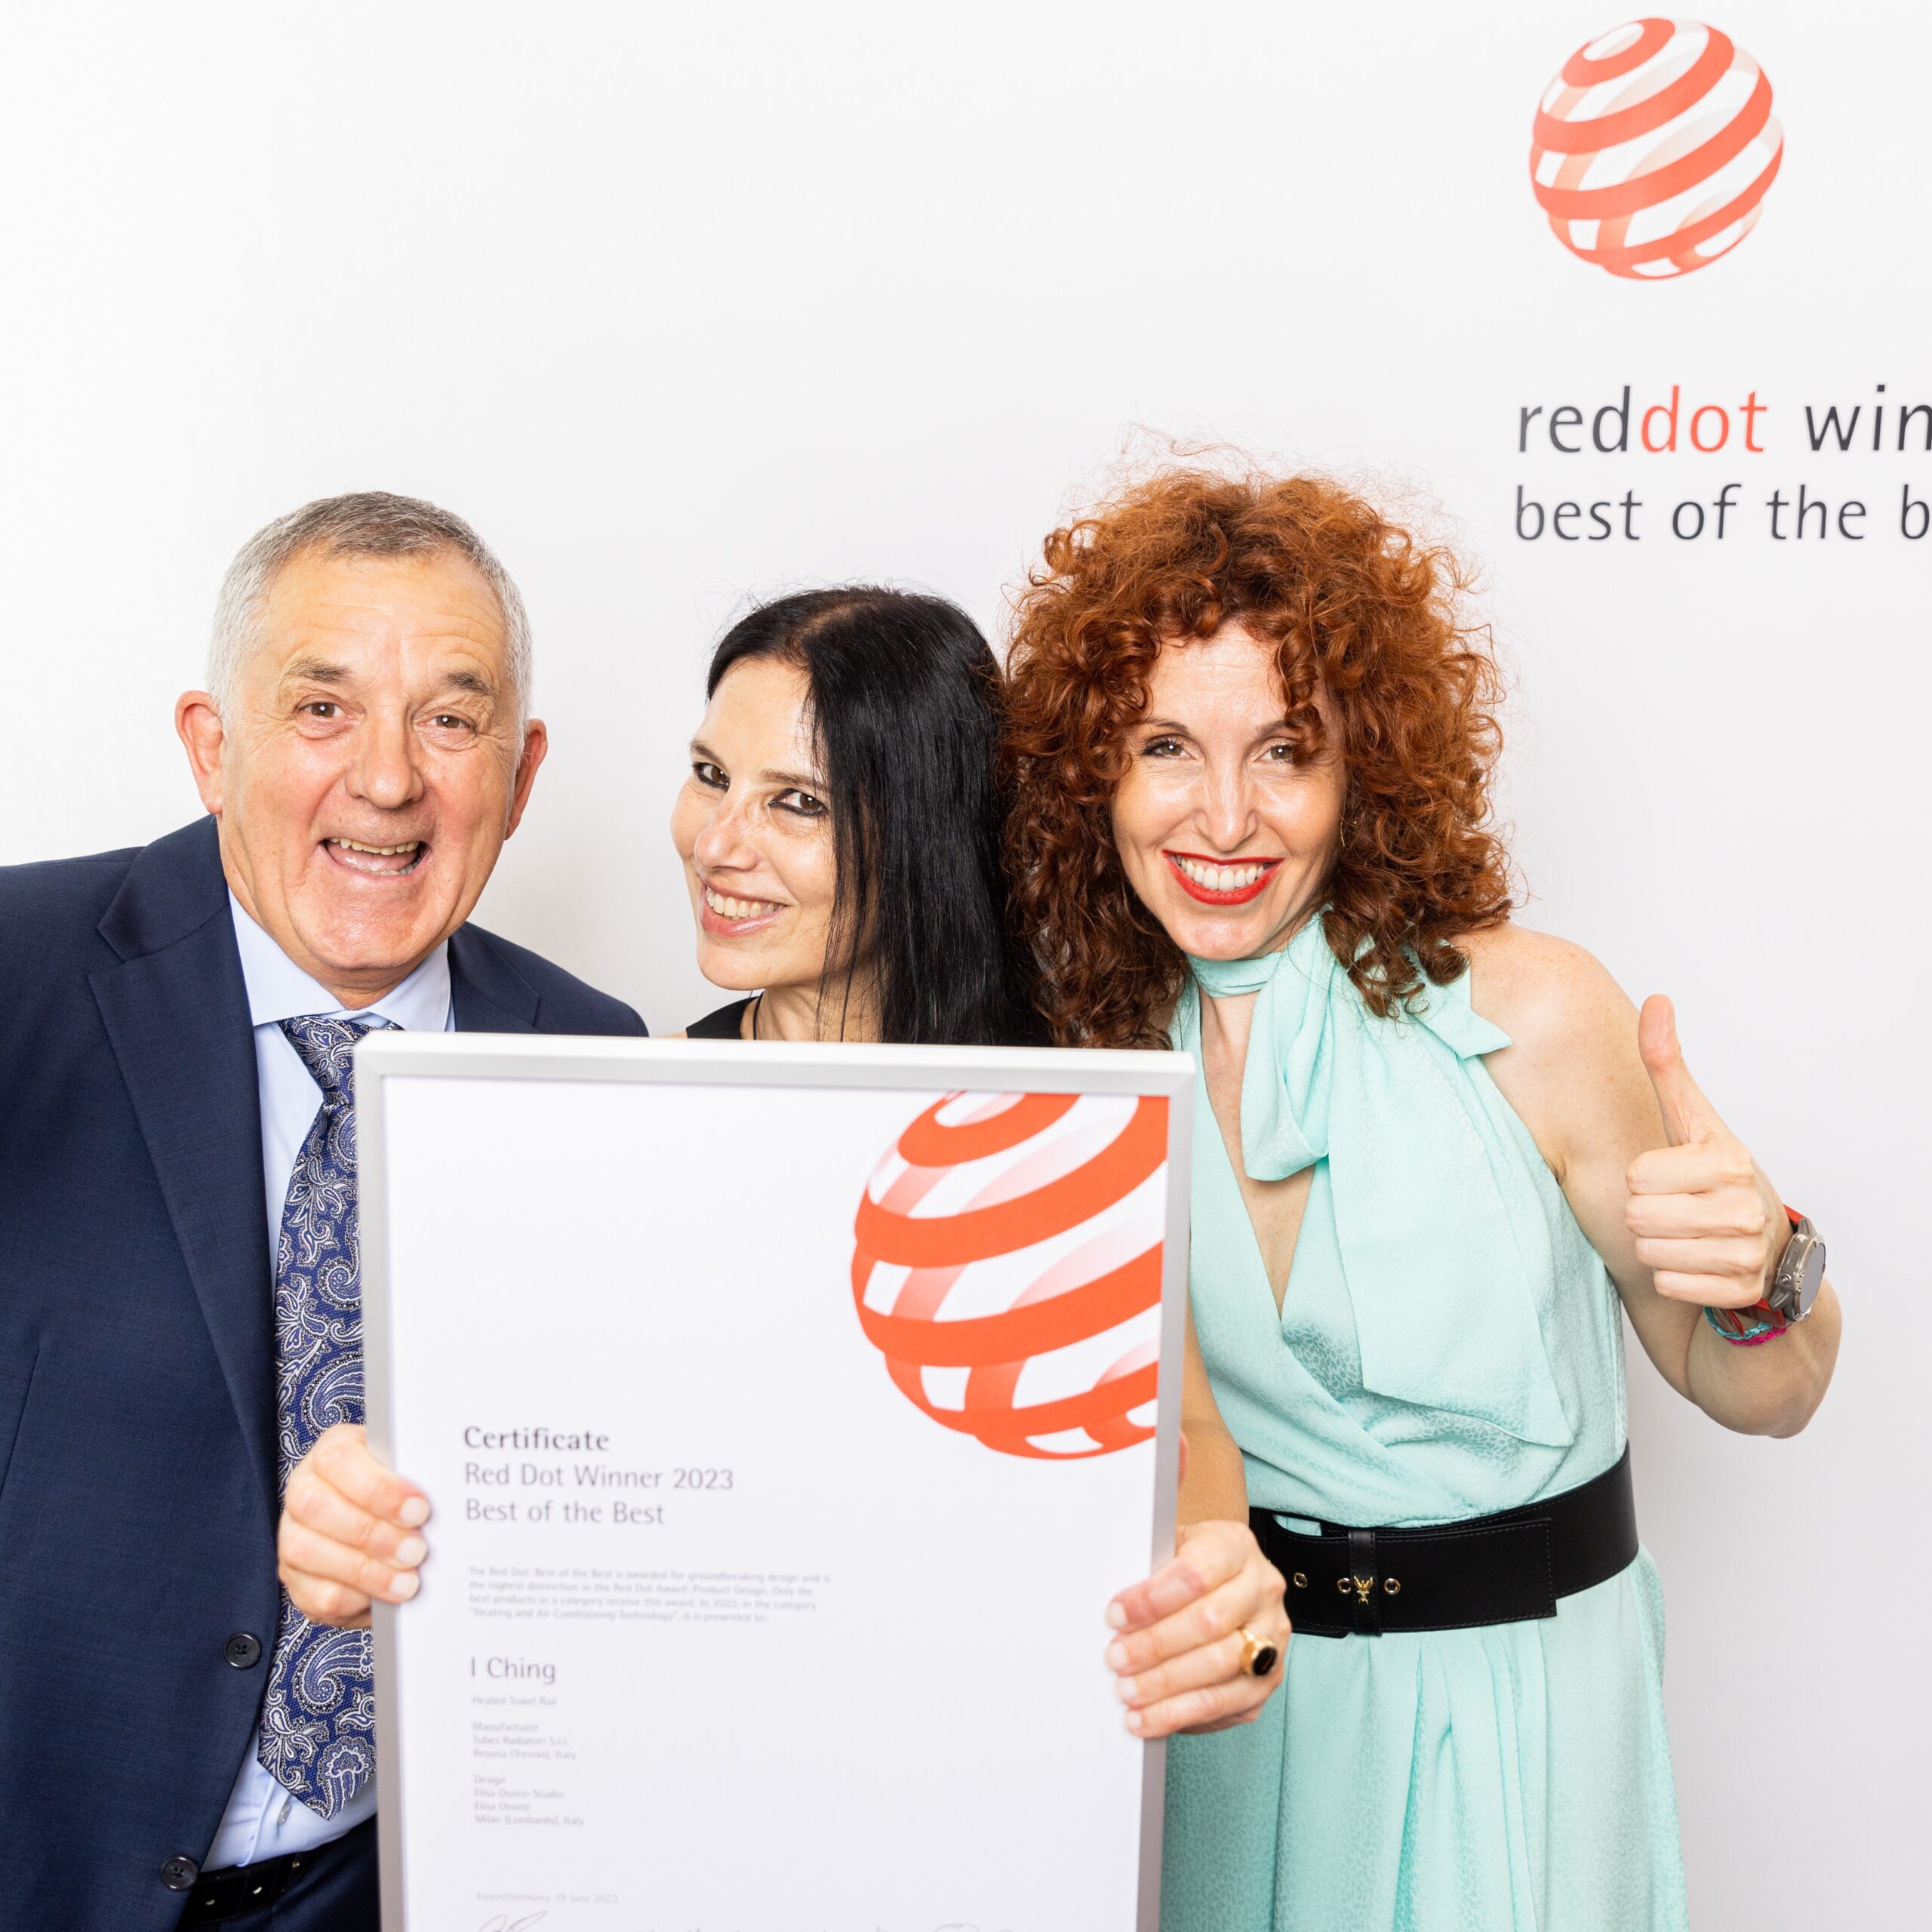 I Ching premiato al Red Dot Gala con il Best of the Best